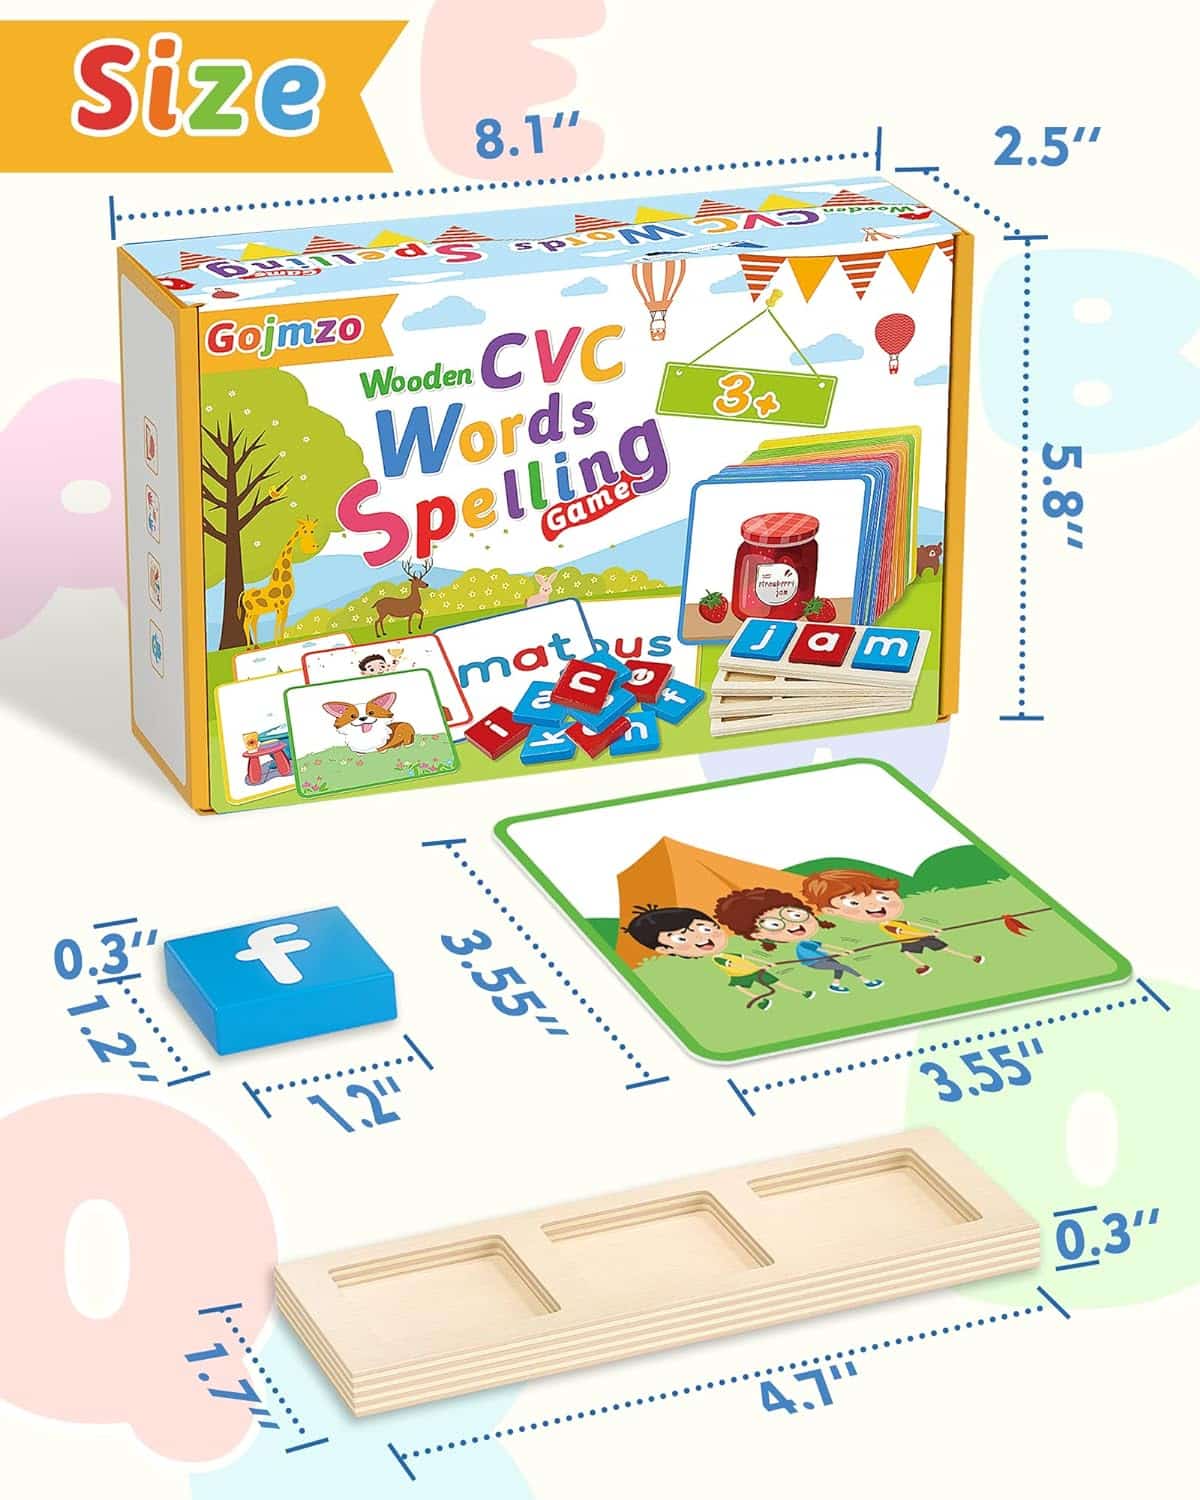 Gojmzo Wooden CVC Word Spelling Games: The Perfect Educational Toy for Kids